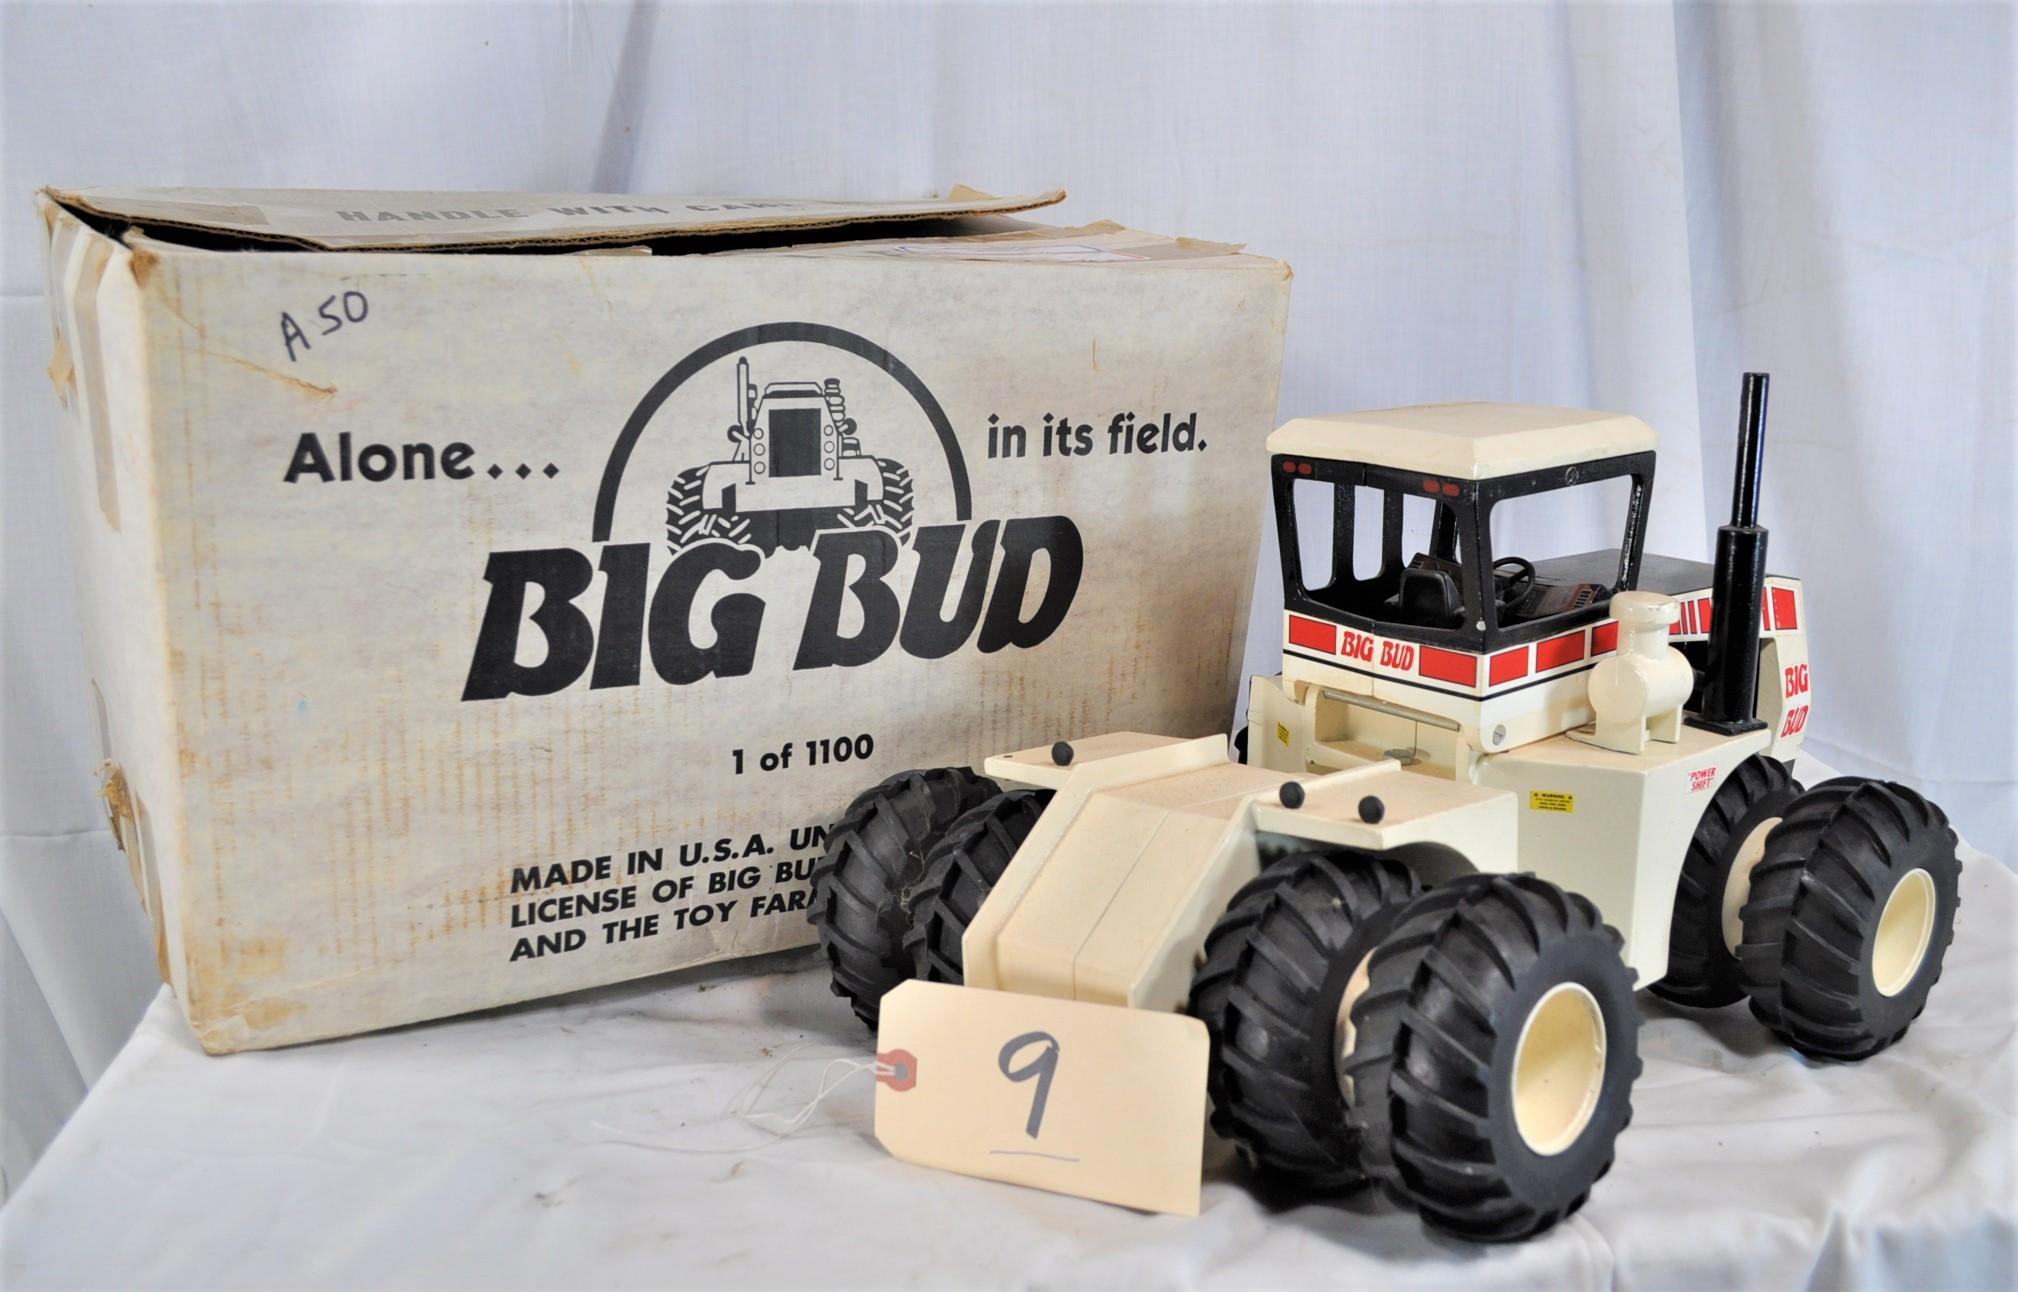 Big Bud 360/30 Power shift with duals - Limited Edition 1 of 1,100 - 1/16th scale